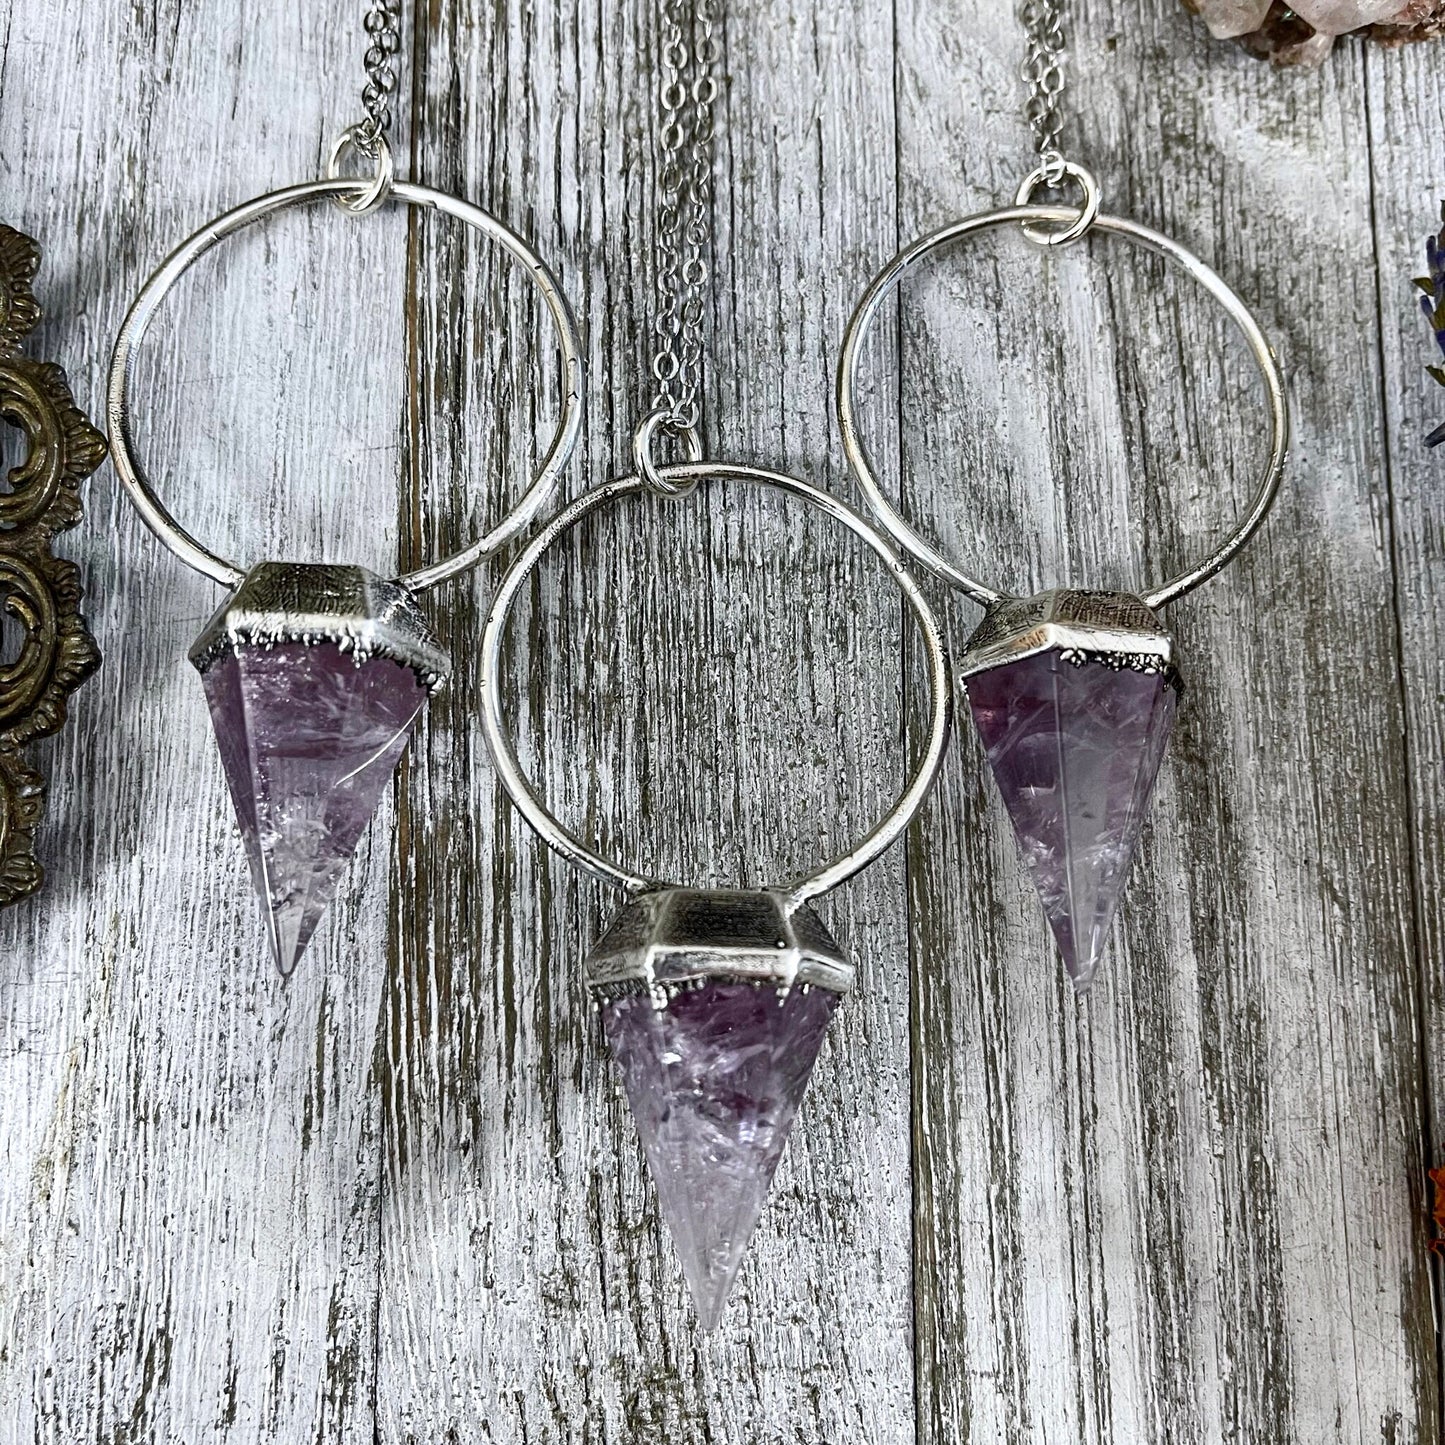 Amethyst Necklace, Crystal Jewelry, Crystal Necklaces, Crystal Pendulum, Etsy ID: 749750908, FOXLARK- NECKLACES, Gothic Jewelry, healing crystals, Jewelry, Necklaces, Pendulum Necklace, Purple Stone Jewelry, Raw Crystal Necklace, Silver Pendulum, Stone Pe